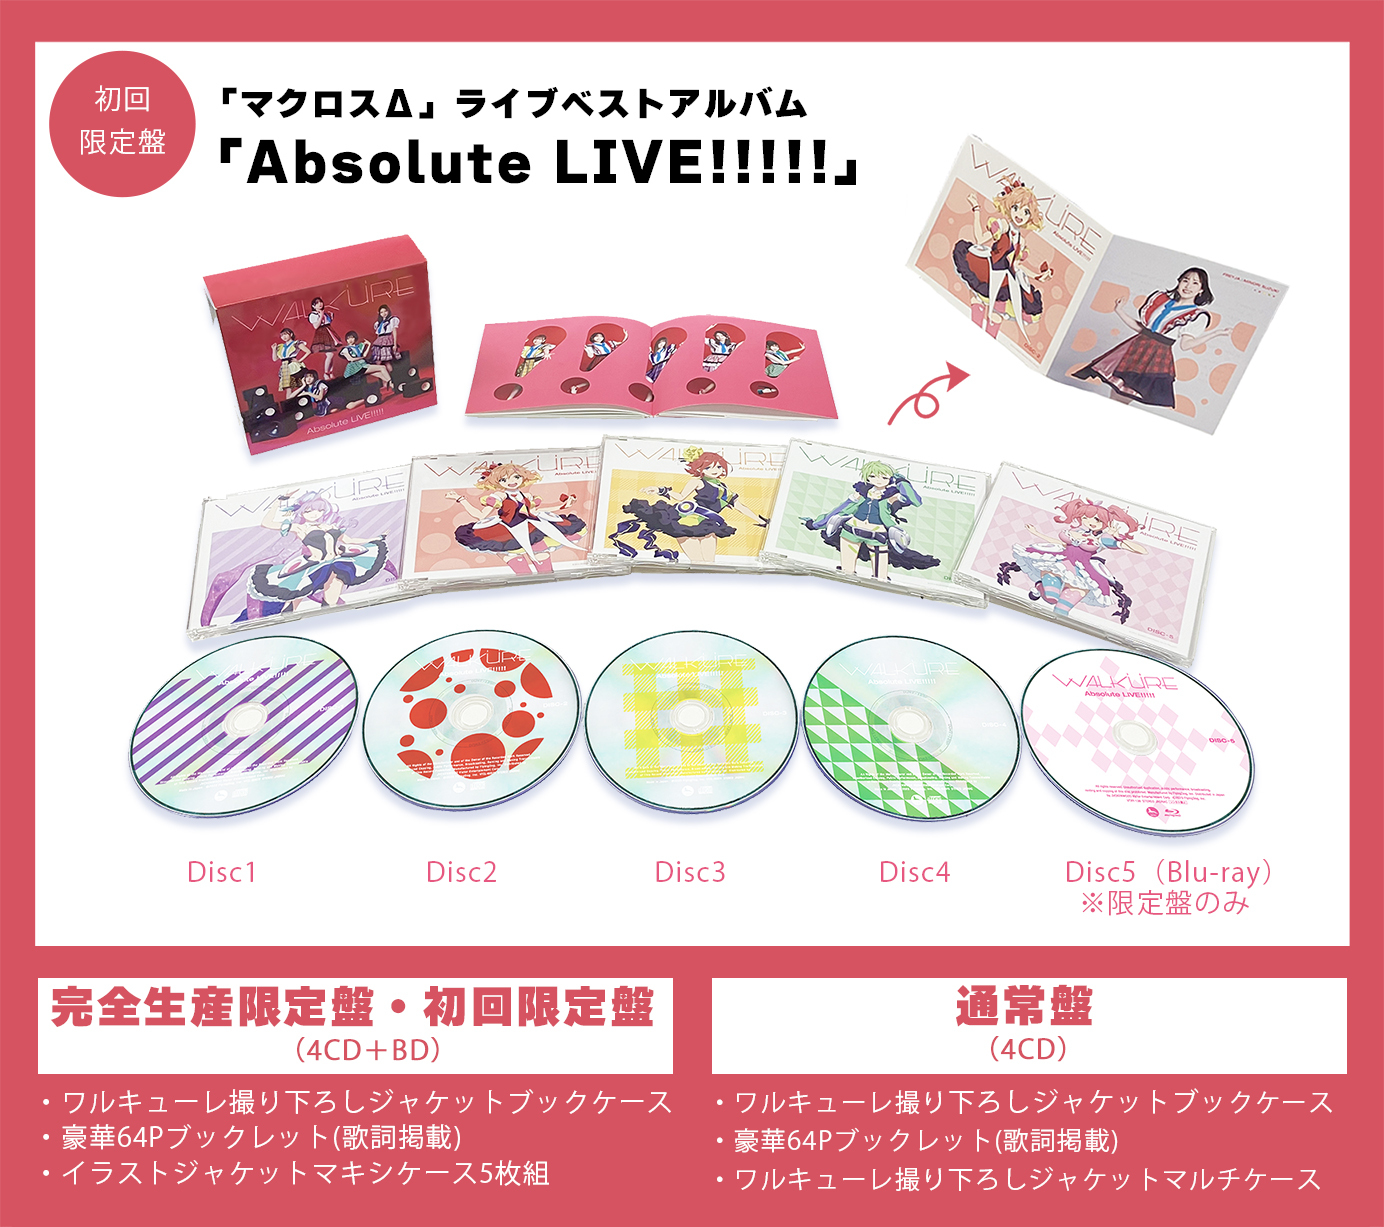 『Absolute LIVE!!!!!』初回限定盤パッケージ展開図